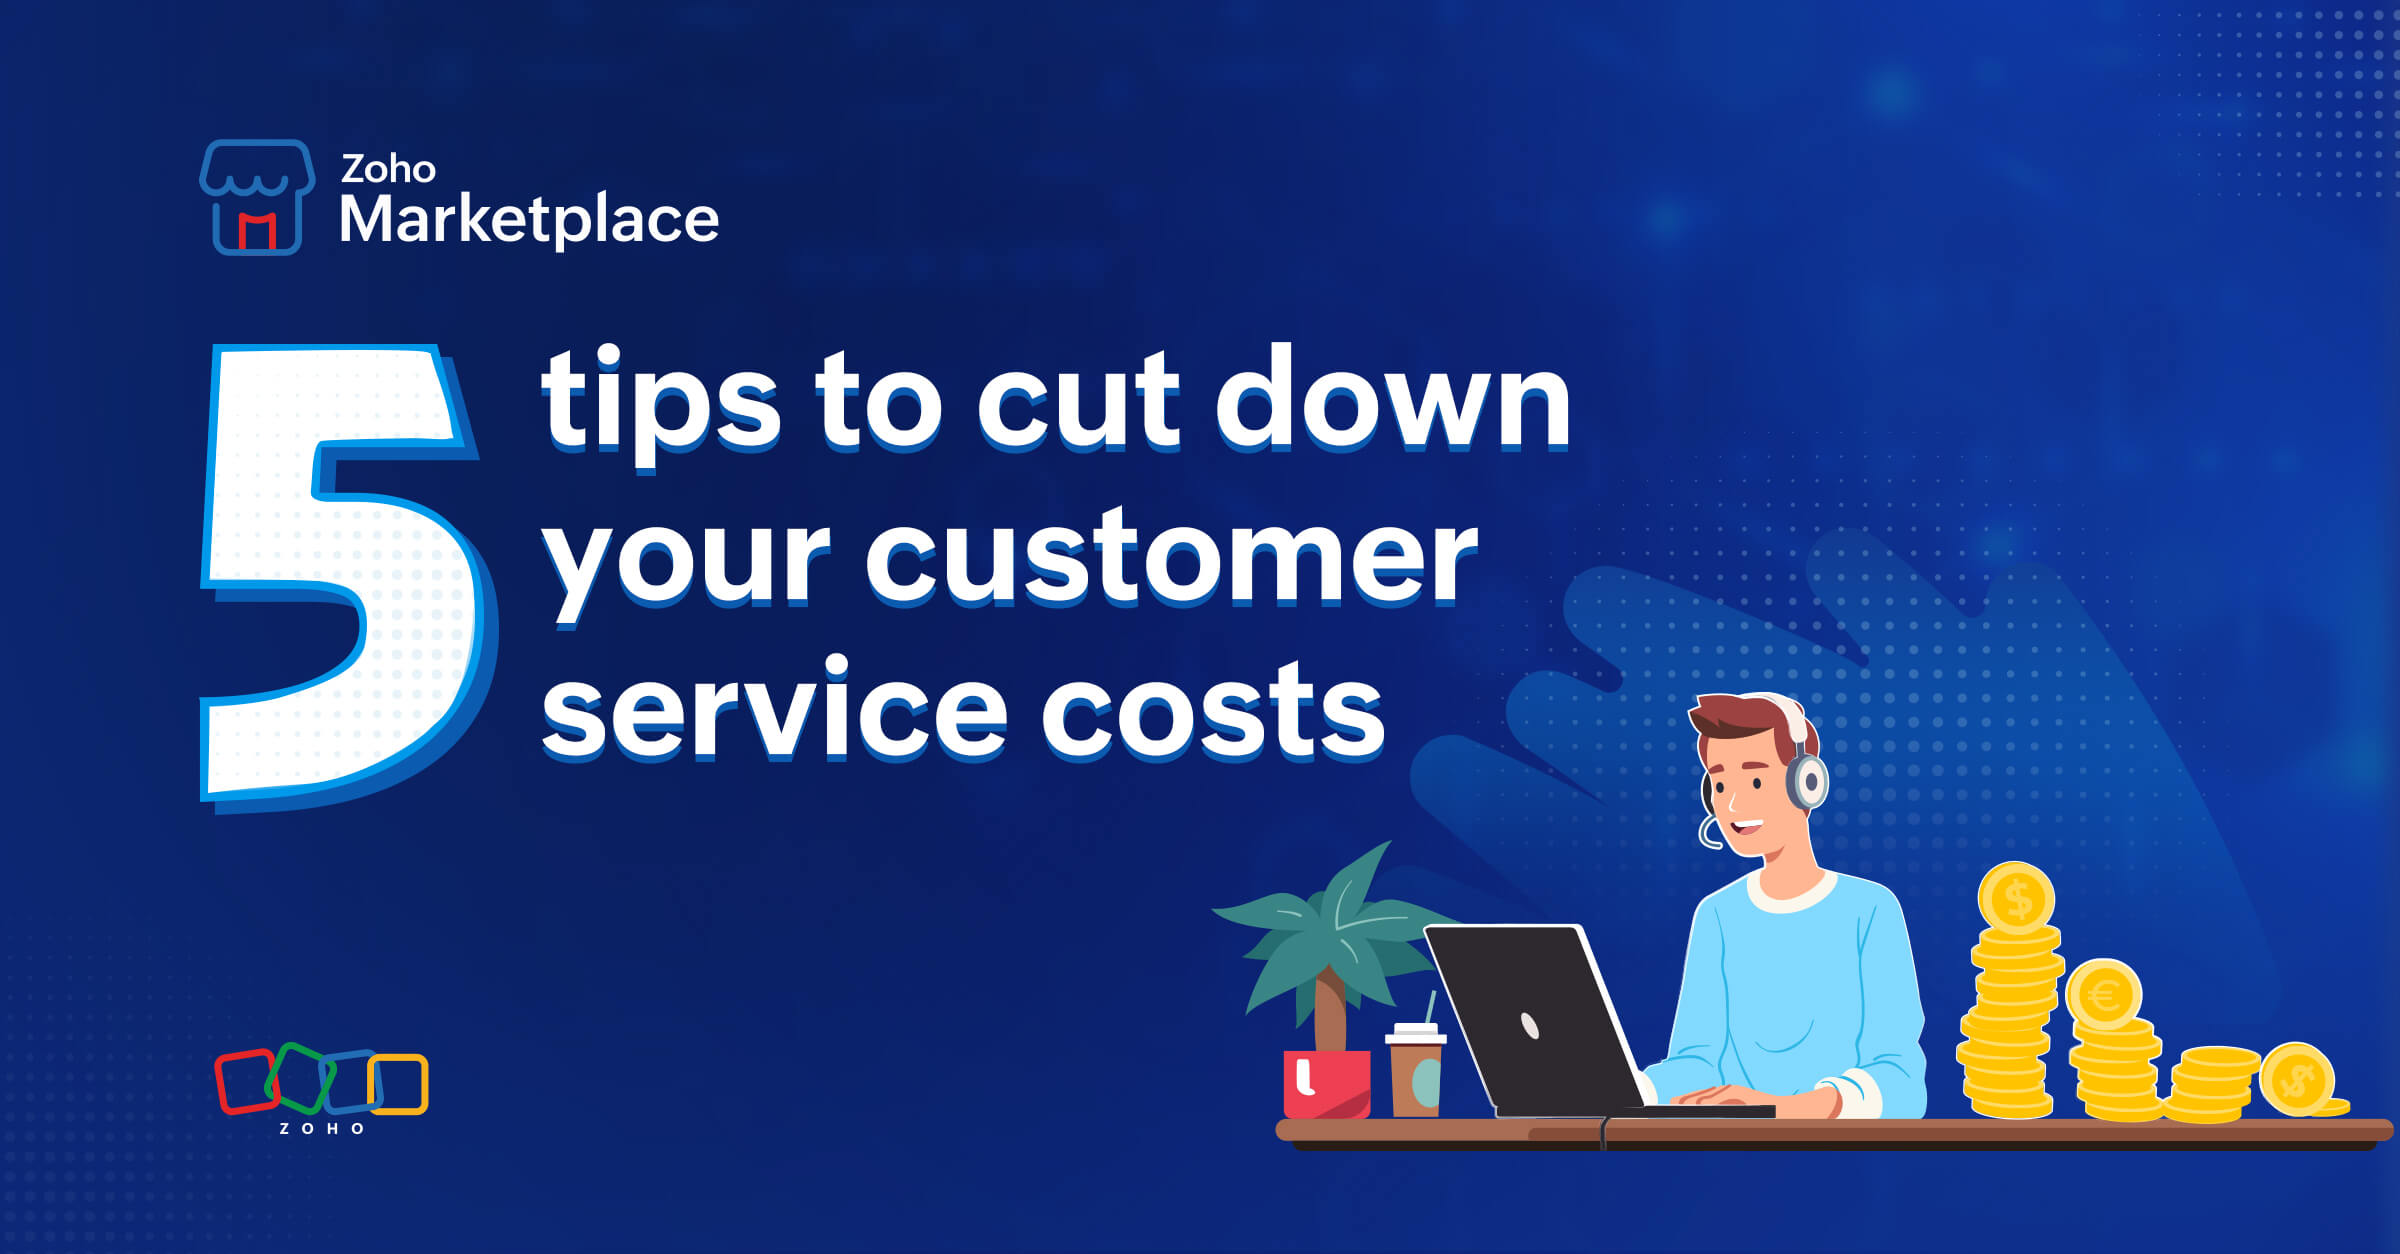 ProTips: 5 tips to cut down your customer service costs